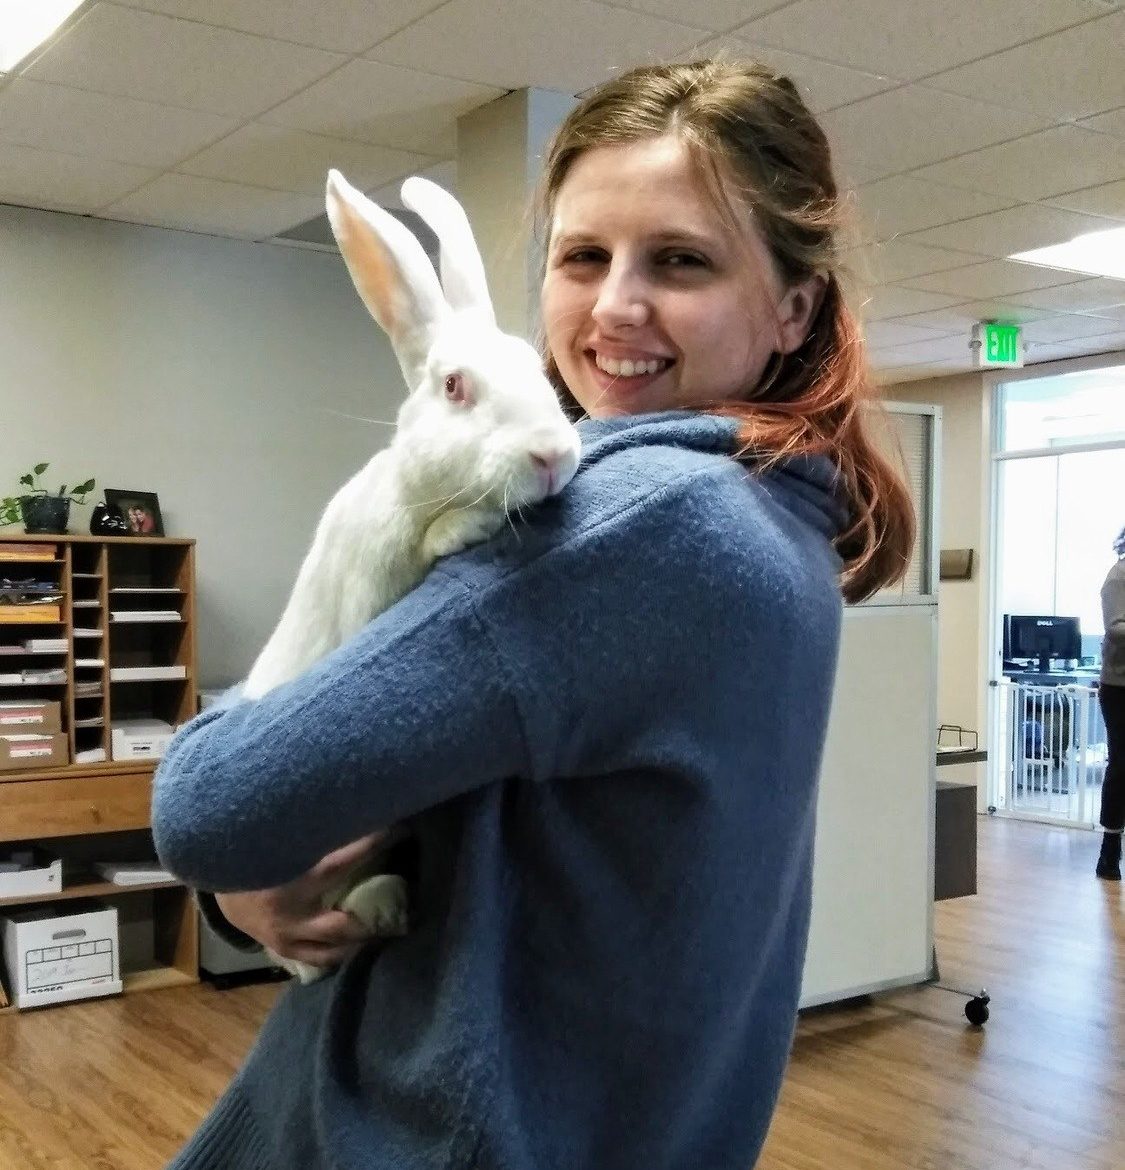 Caty is a Caucasian female with brown hair and pink highlights. She is wearing a blue sweater and holding a white bunny in her arms. The background shows the RedRover office. 